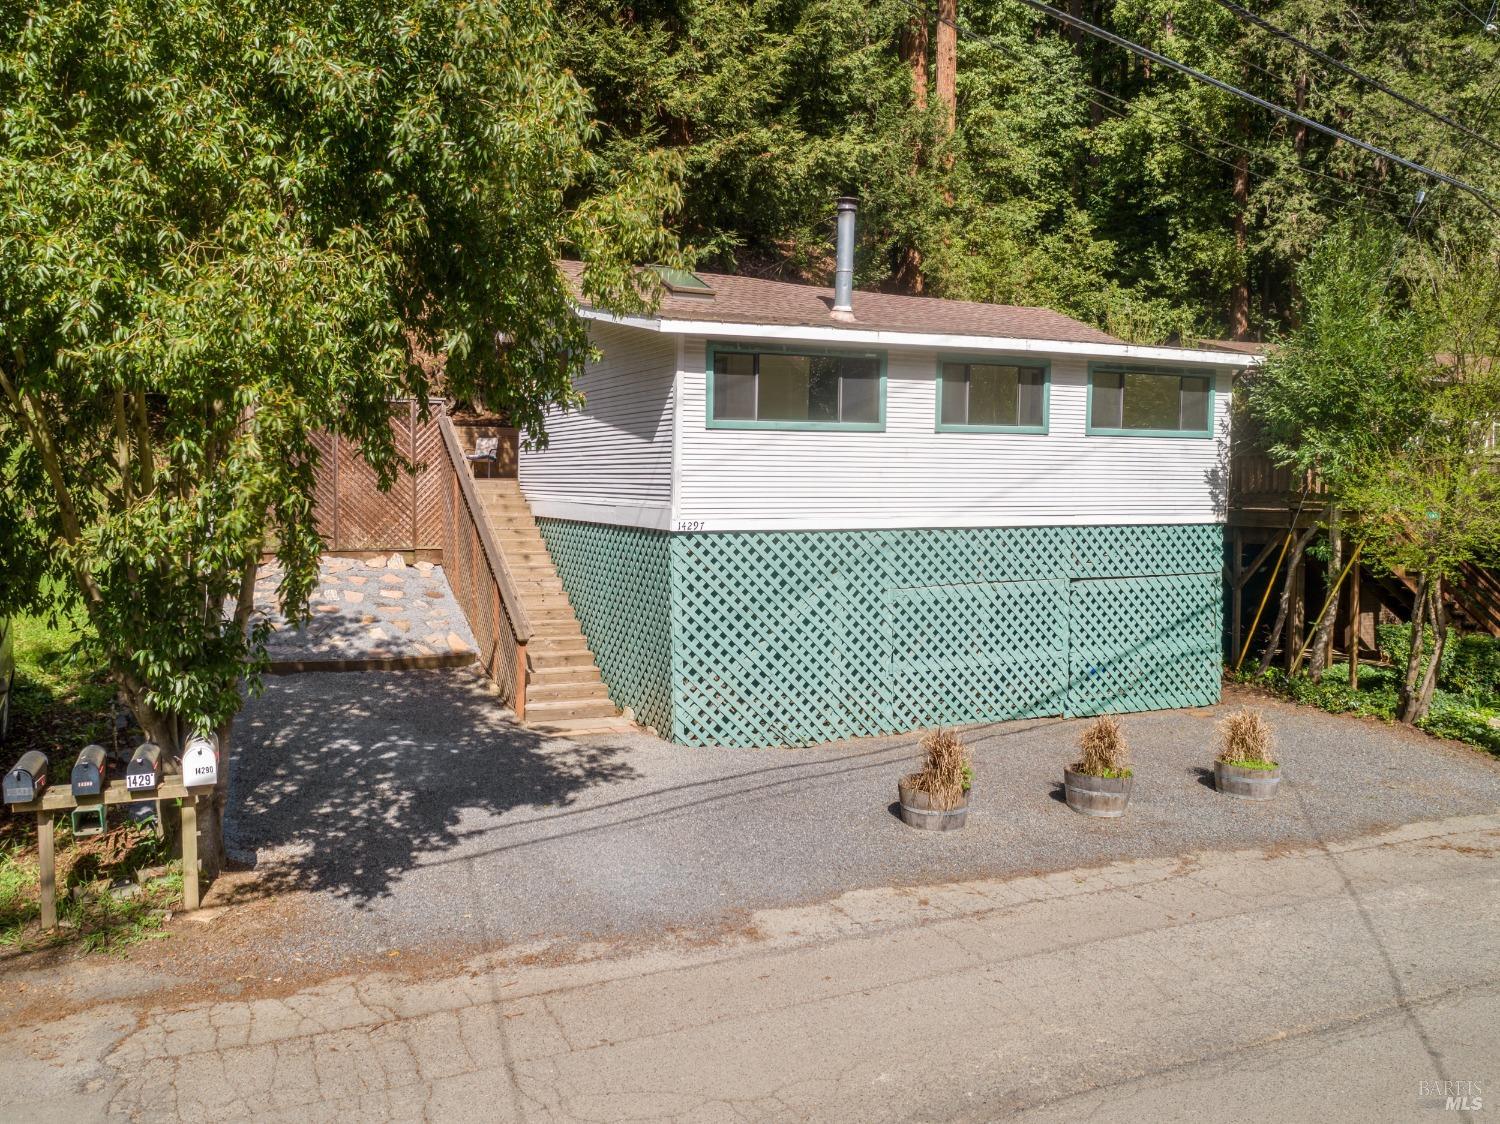 Photo of 14297 Old Cazadero Rd in Guerneville, CA